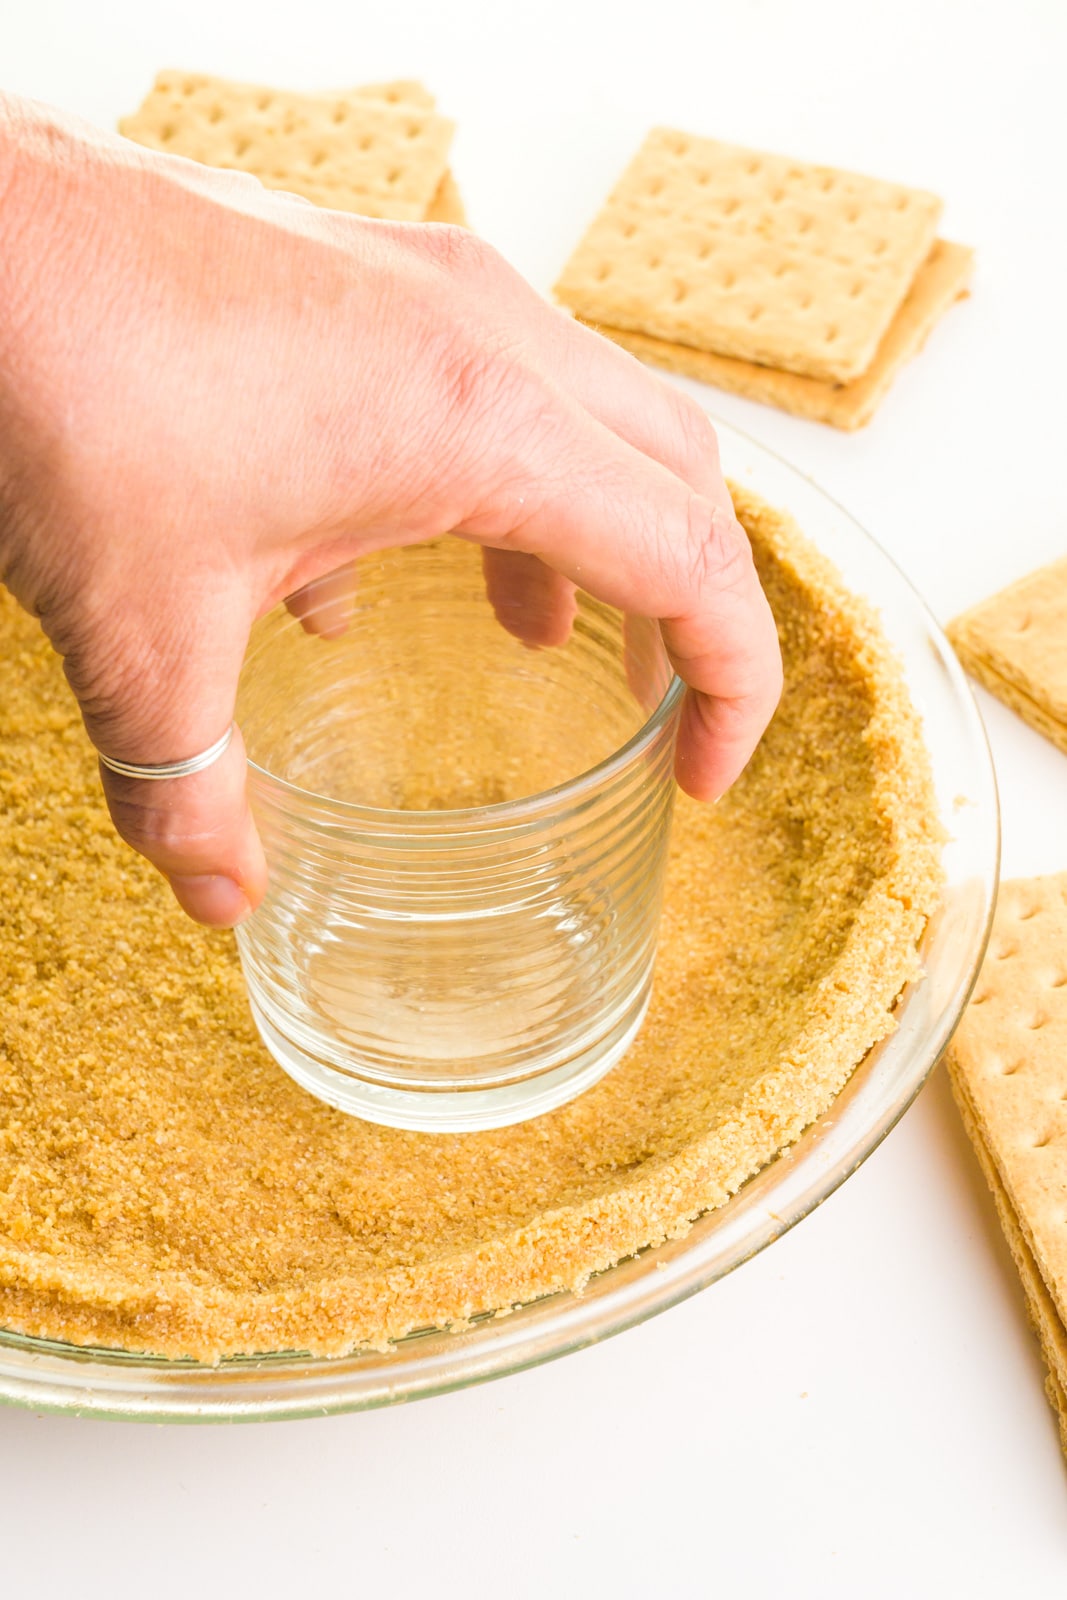 A hand holds a glass, using it to press crumbs into a pie pan.